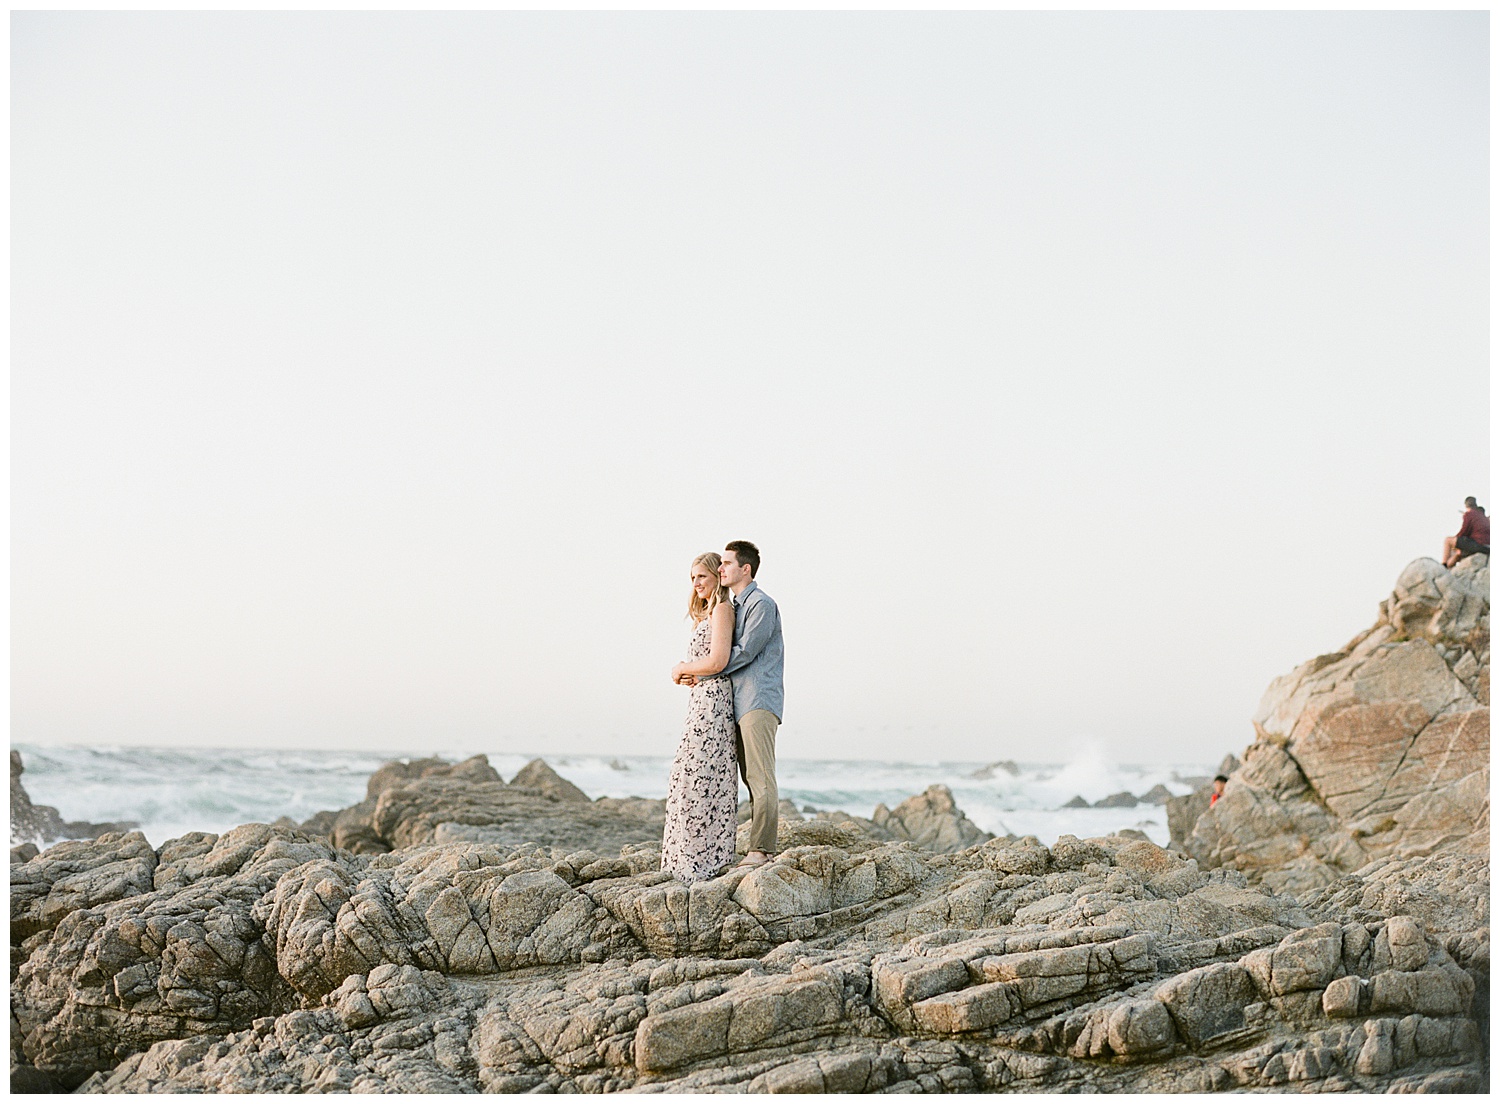 landscape photo of couple embracing on the rocks of Pebble Beach staring out at the ocean by film photographer Ags Photo Art